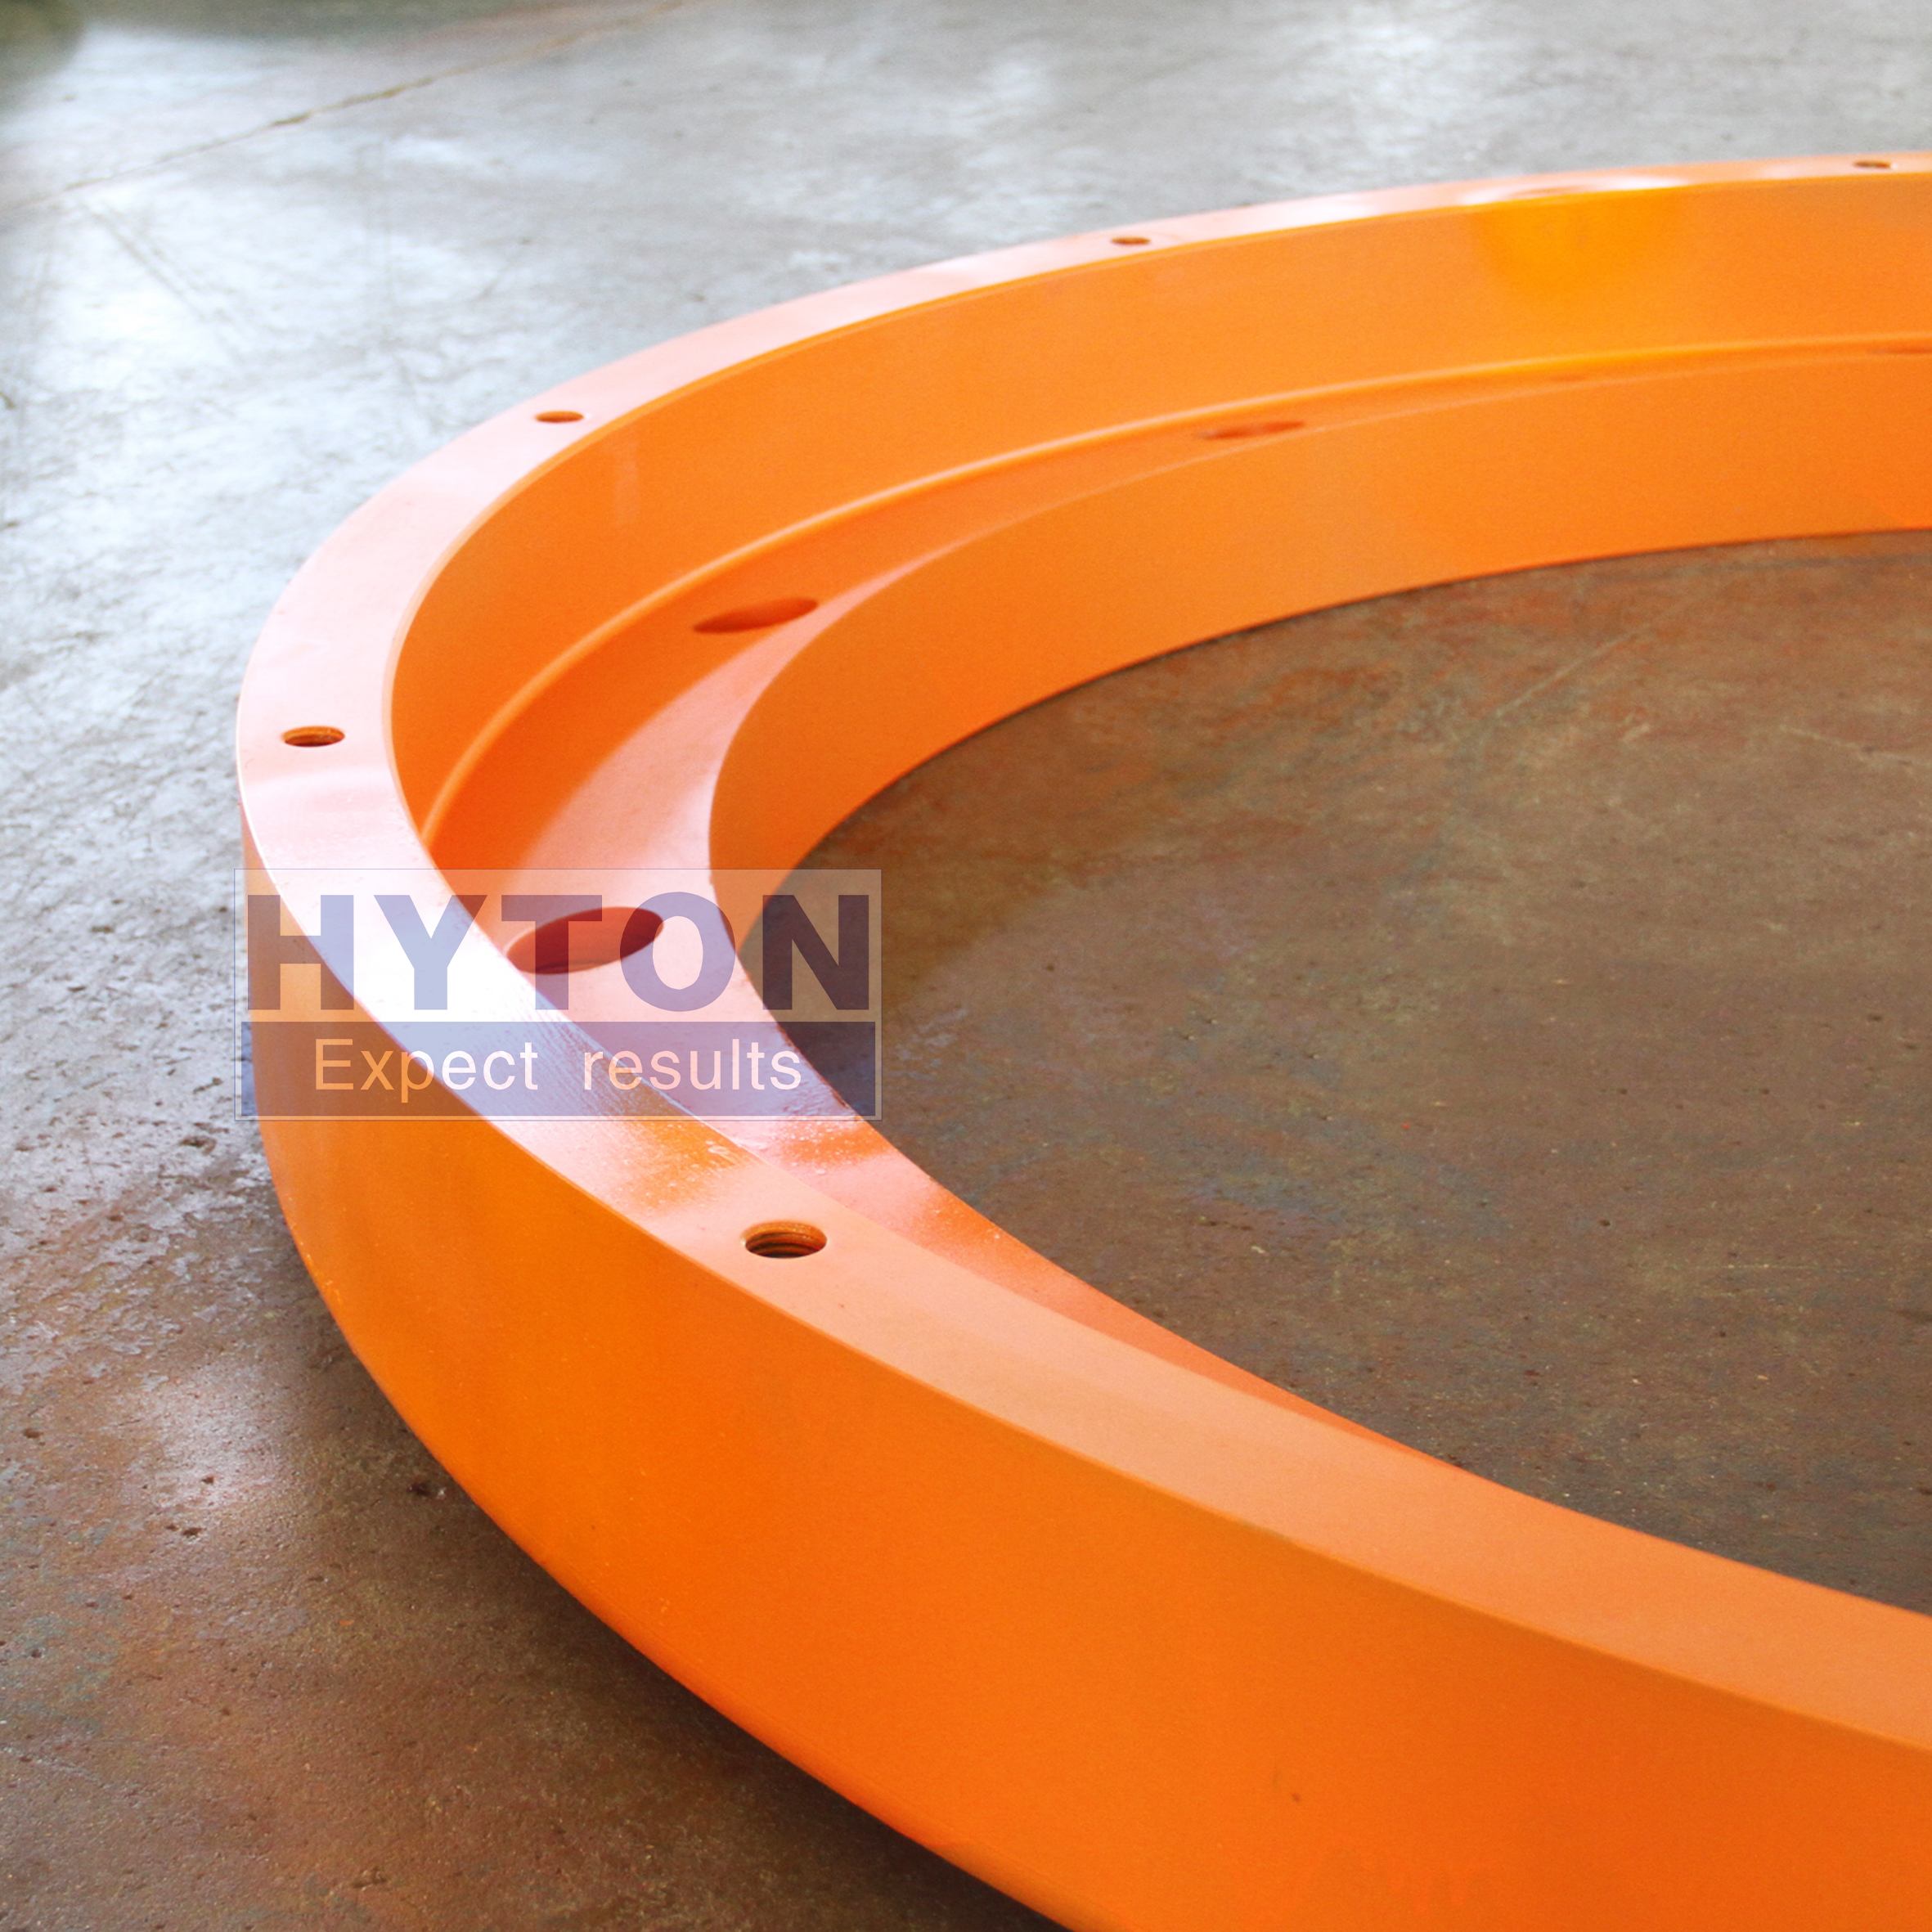 Upper Dust Seal Retainer Fit for Metso SG60-89 Gyratory Crusher Spare Part